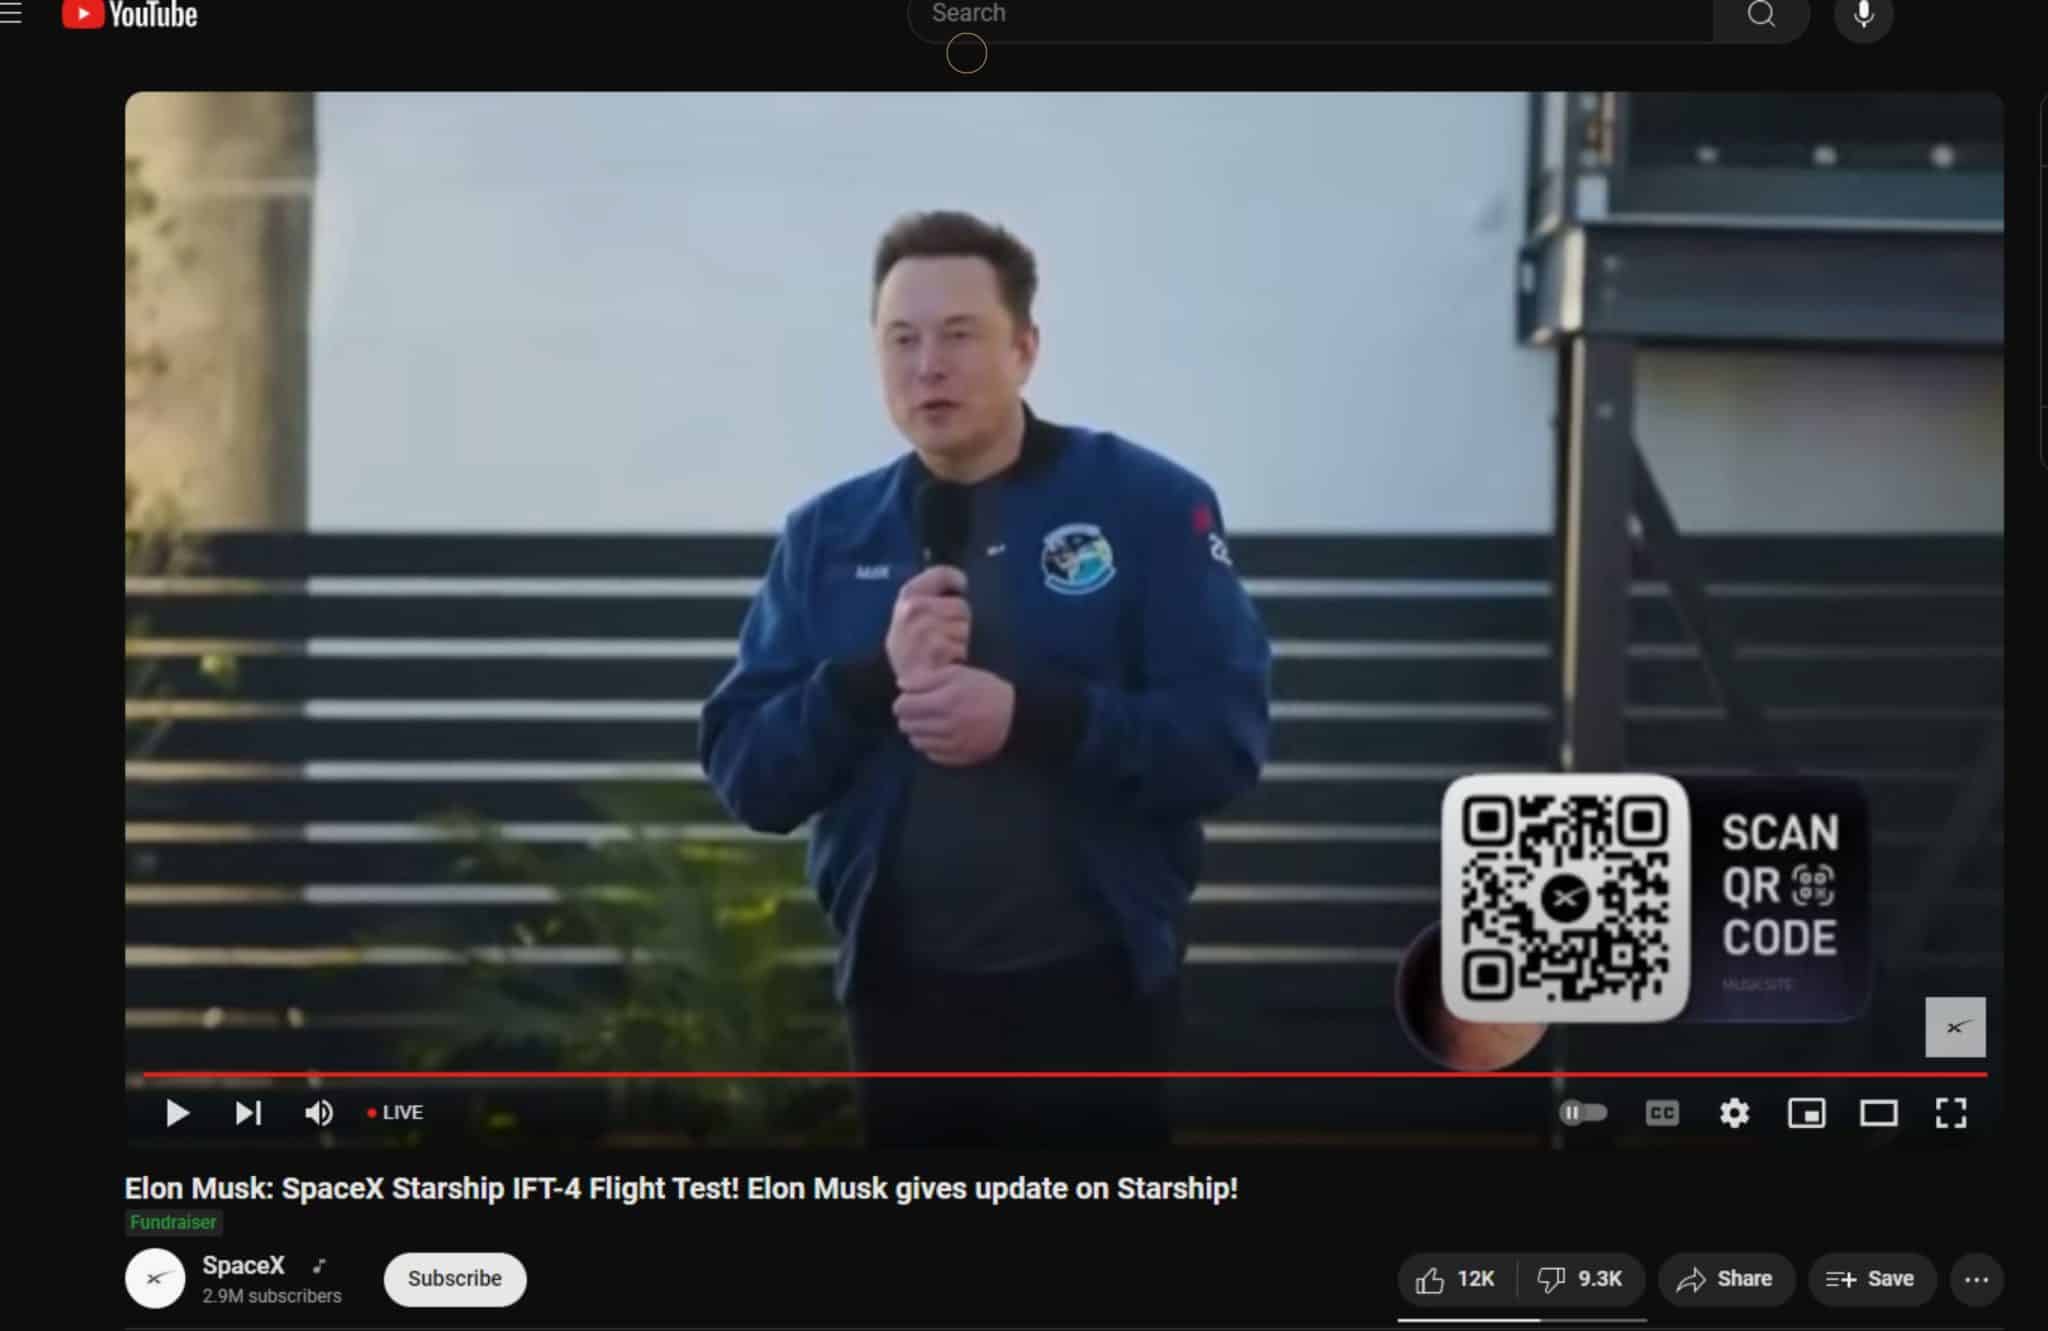 Find out how an AI-generated video of Elon Musk was used in an Elon Musk crypto scam on YouTube. Discover tactics used by SpaceX scam here.